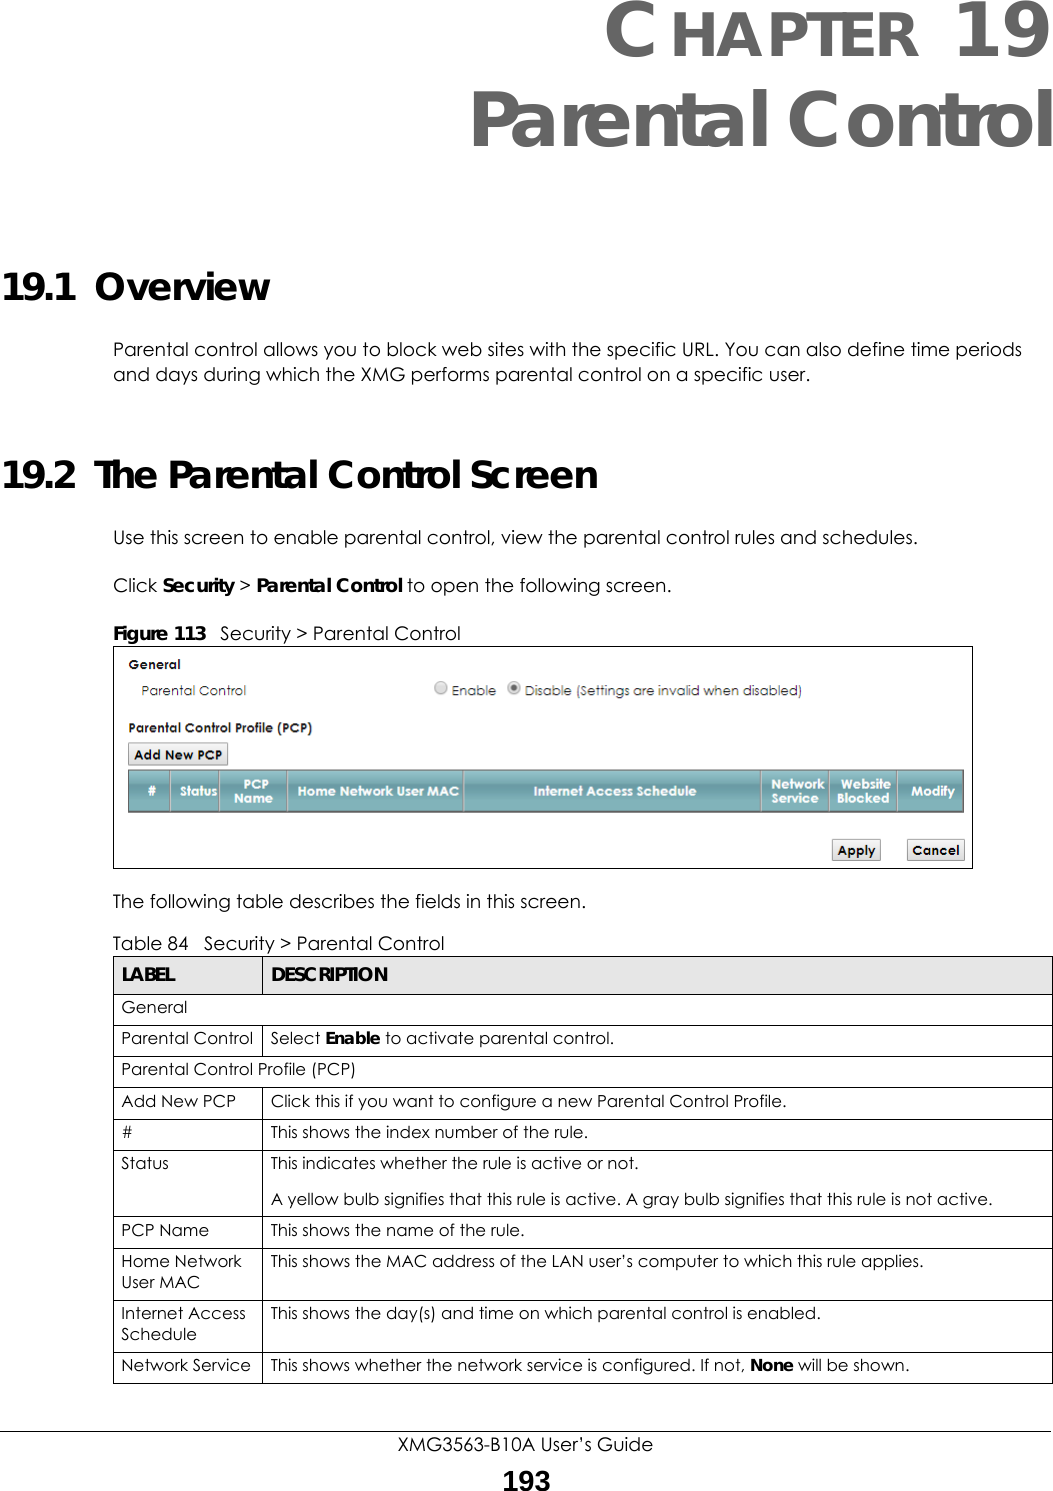 XMG3563-B10A User’s Guide193CHAPTER 19Parental Control19.1  OverviewParental control allows you to block web sites with the specific URL. You can also define time periods and days during which the XMG performs parental control on a specific user. 19.2  The Parental Control ScreenUse this screen to enable parental control, view the parental control rules and schedules.Click Security &gt; Parental Control to open the following screen. Figure 113   Security &gt; Parental Control The following table describes the fields in this screen. Table 84   Security &gt; Parental ControlLABEL DESCRIPTIONGeneralParental Control Select Enable to activate parental control.Parental Control Profile (PCP)Add New PCP Click this if you want to configure a new Parental Control Profile.#This shows the index number of the rule.Status This indicates whether the rule is active or not.A yellow bulb signifies that this rule is active. A gray bulb signifies that this rule is not active.PCP Name This shows the name of the rule.Home Network User MACThis shows the MAC address of the LAN user’s computer to which this rule applies.Internet Access ScheduleThis shows the day(s) and time on which parental control is enabled.Network Service This shows whether the network service is configured. If not, None will be shown.